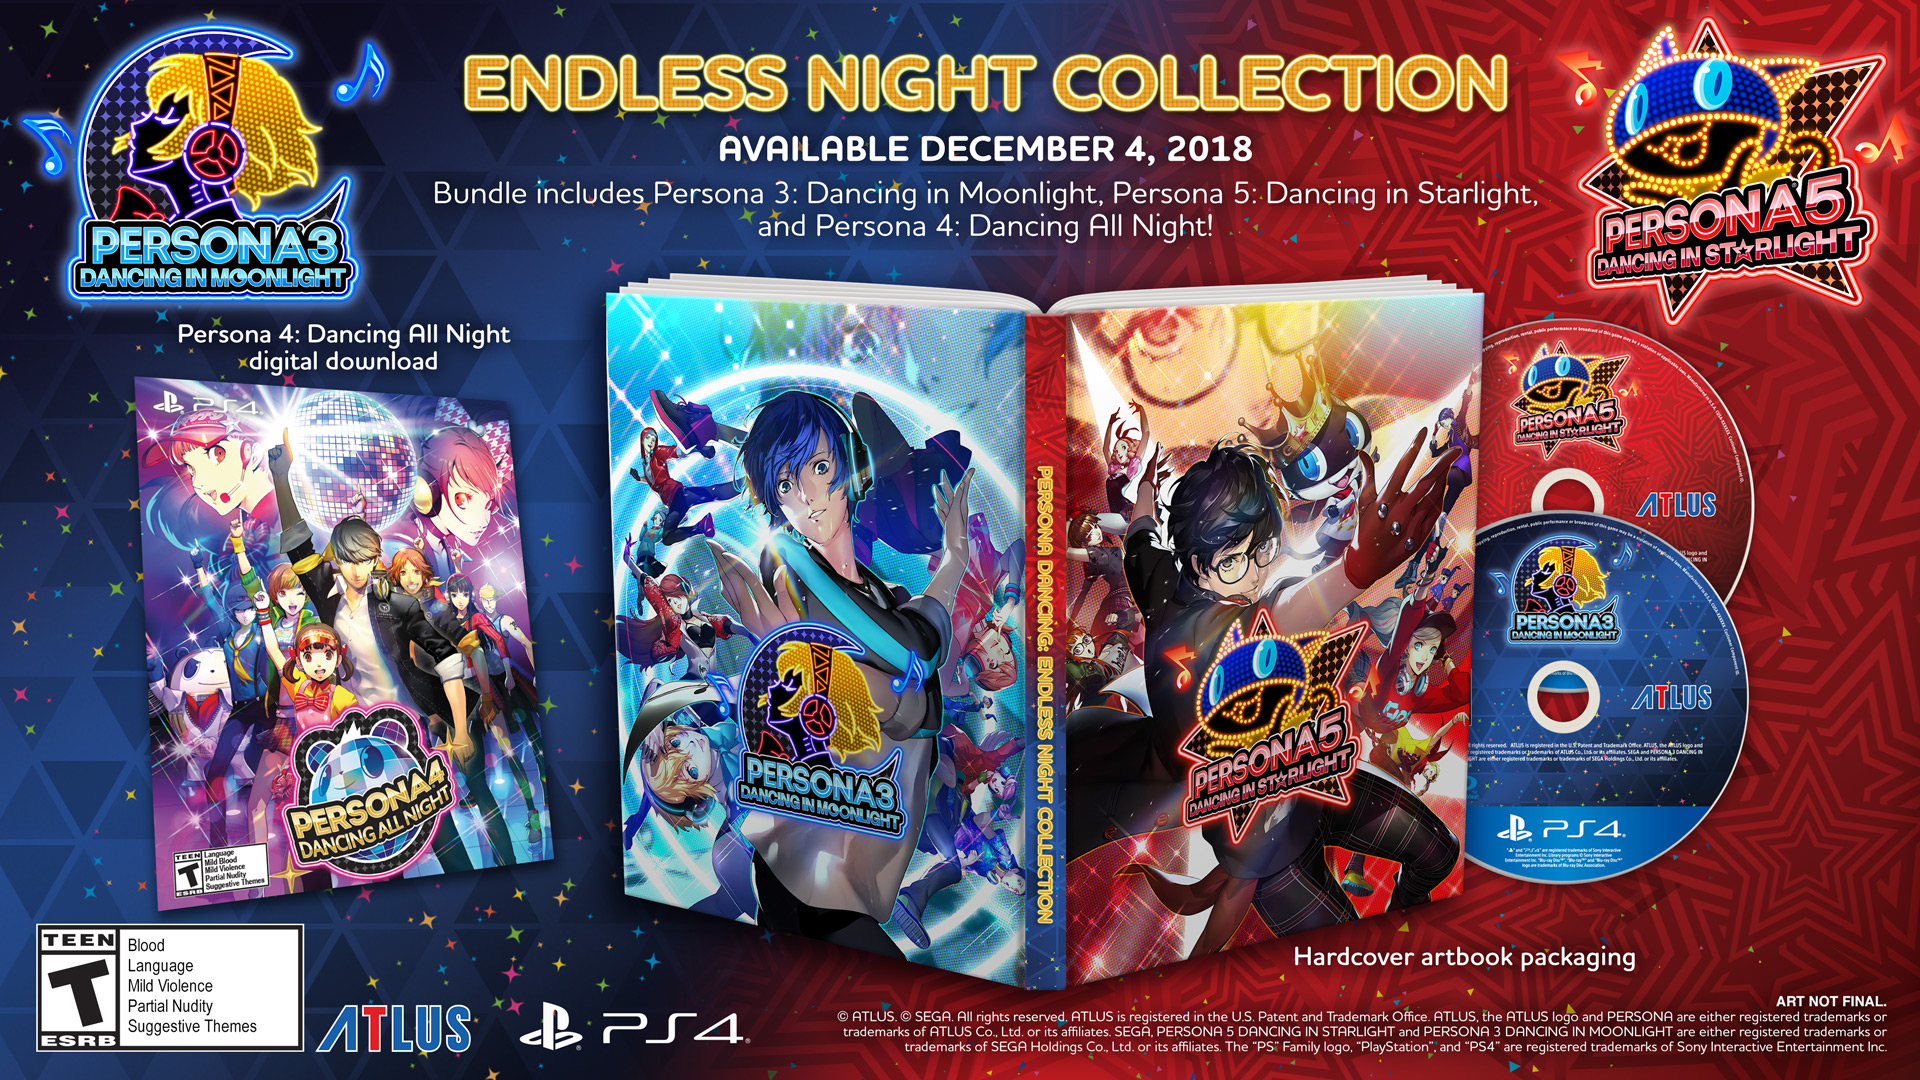 Persona - Endless Night Collection Hardcover Art Packaging